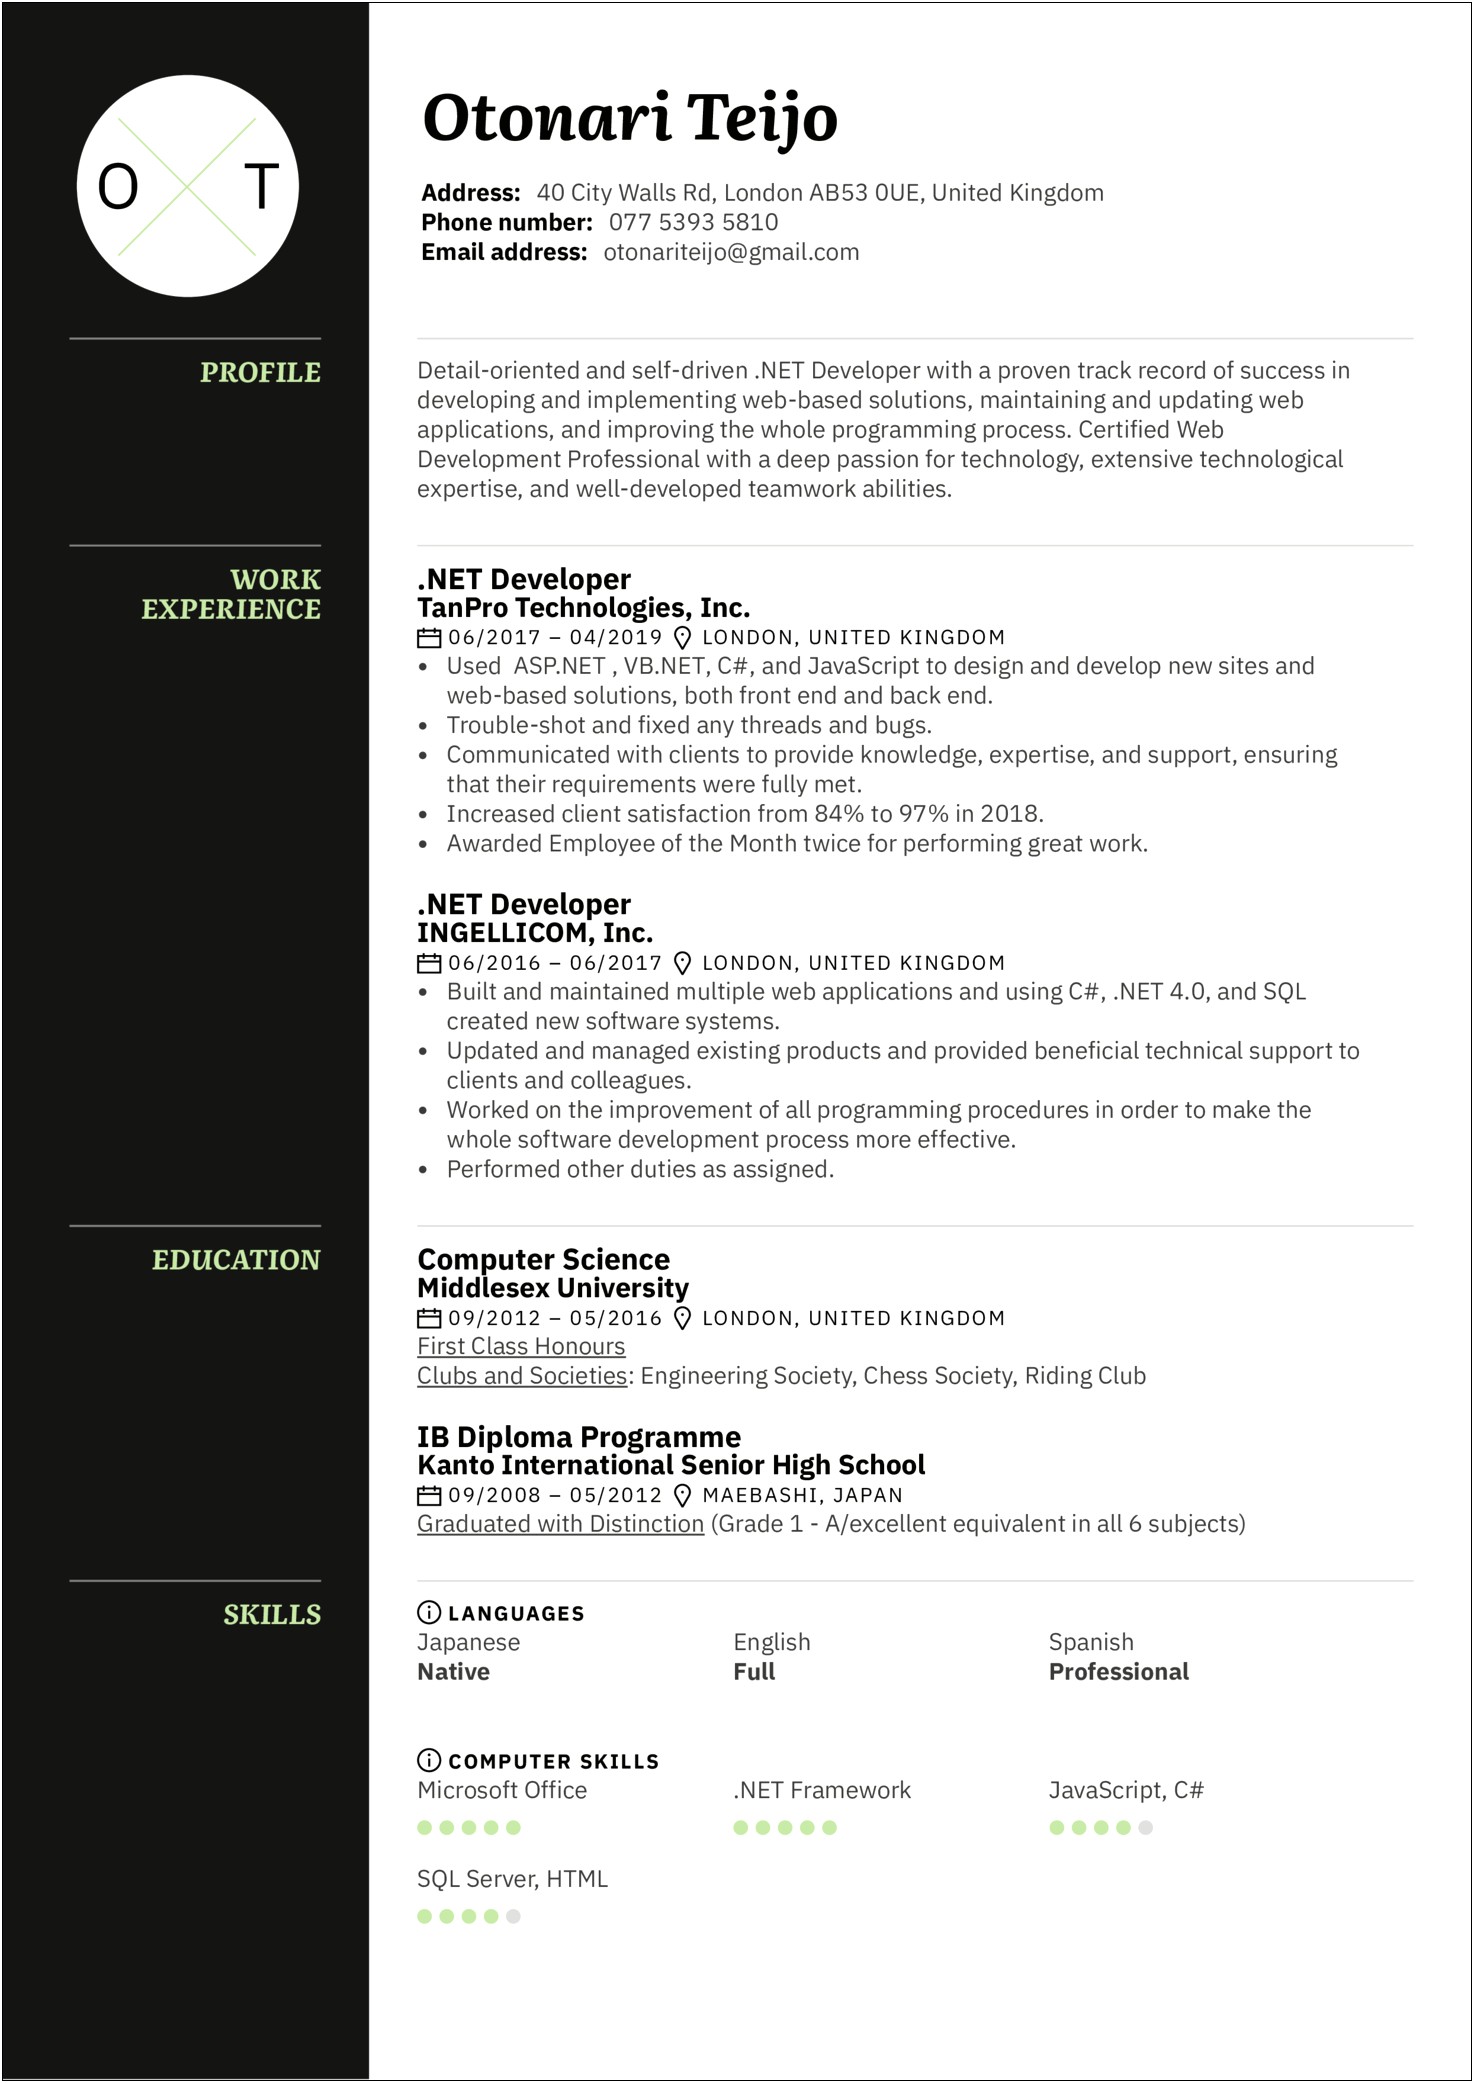 Resume Samples For Experienced Professionals In Net